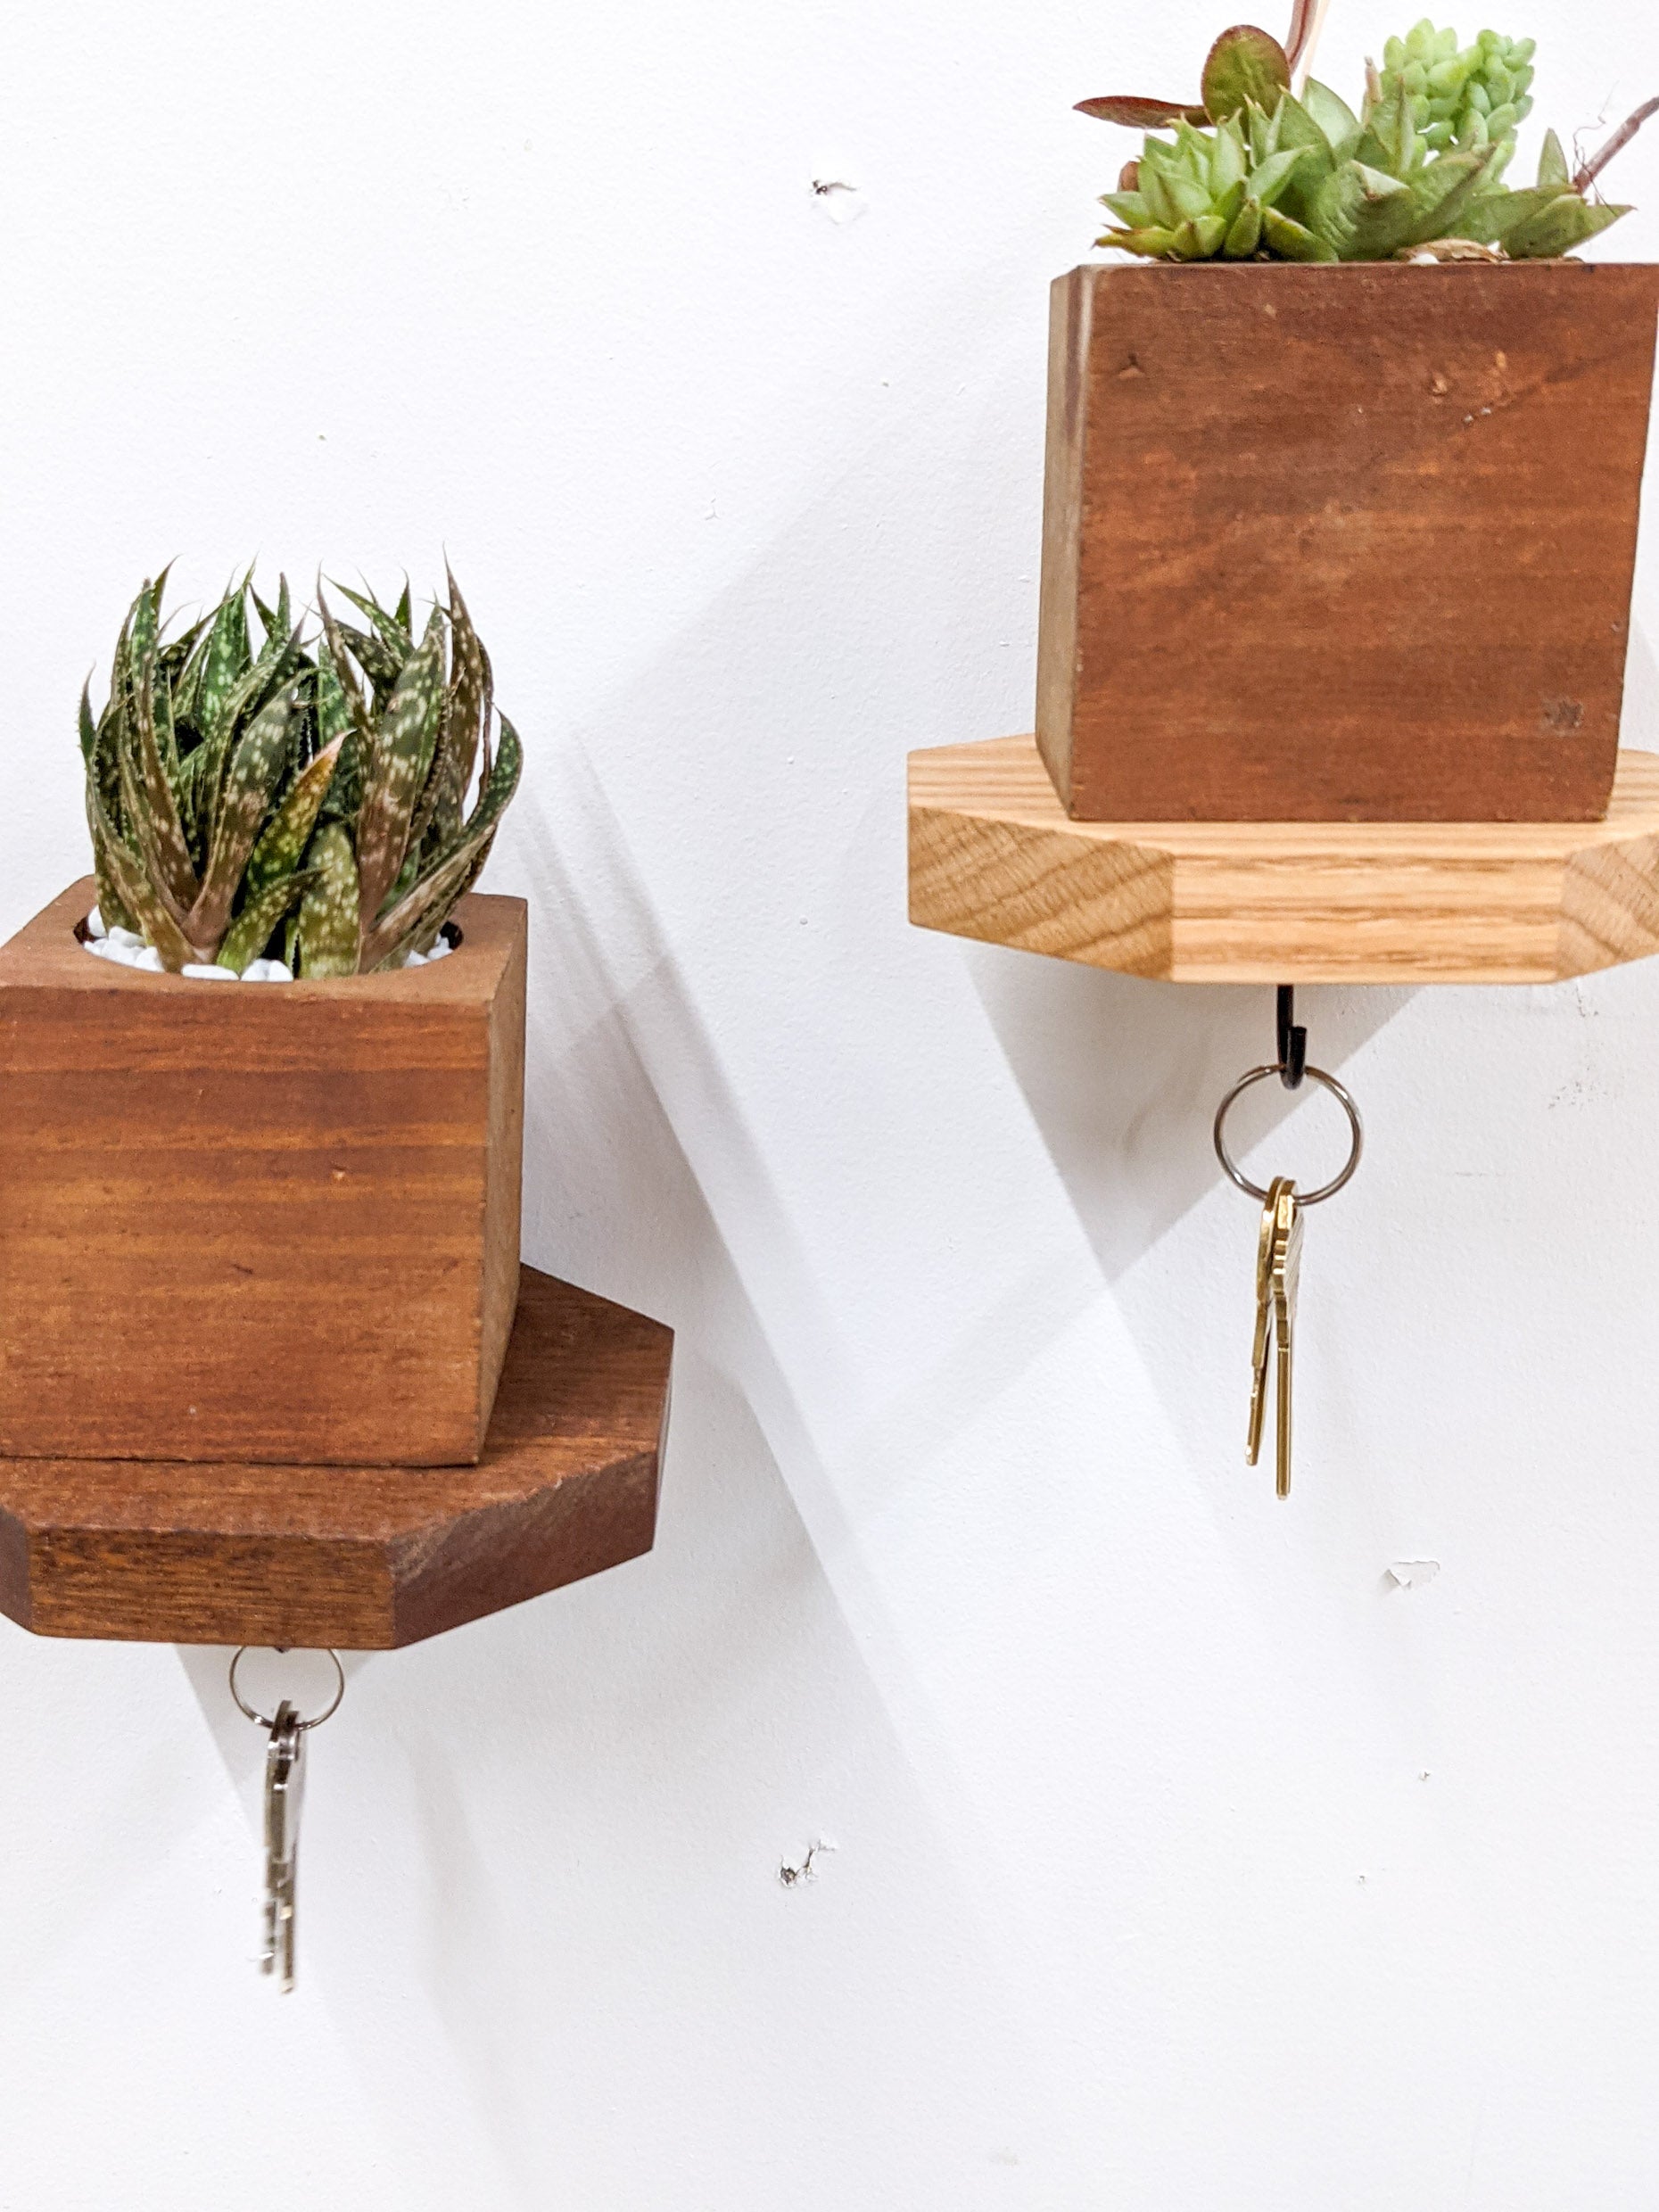 A set of oak and mahogany octagon key shelves are securely installed on a white wall. To the left, a mahogany octagon key shelf holds a square mahogany planter filled with succulents. A set of bronze keys dangle from a black key hook at the bottom. Above and to the right of it, a wall mounted oak octagon key shelf holds a mahogany square planter with succulents and a pair of keys. 